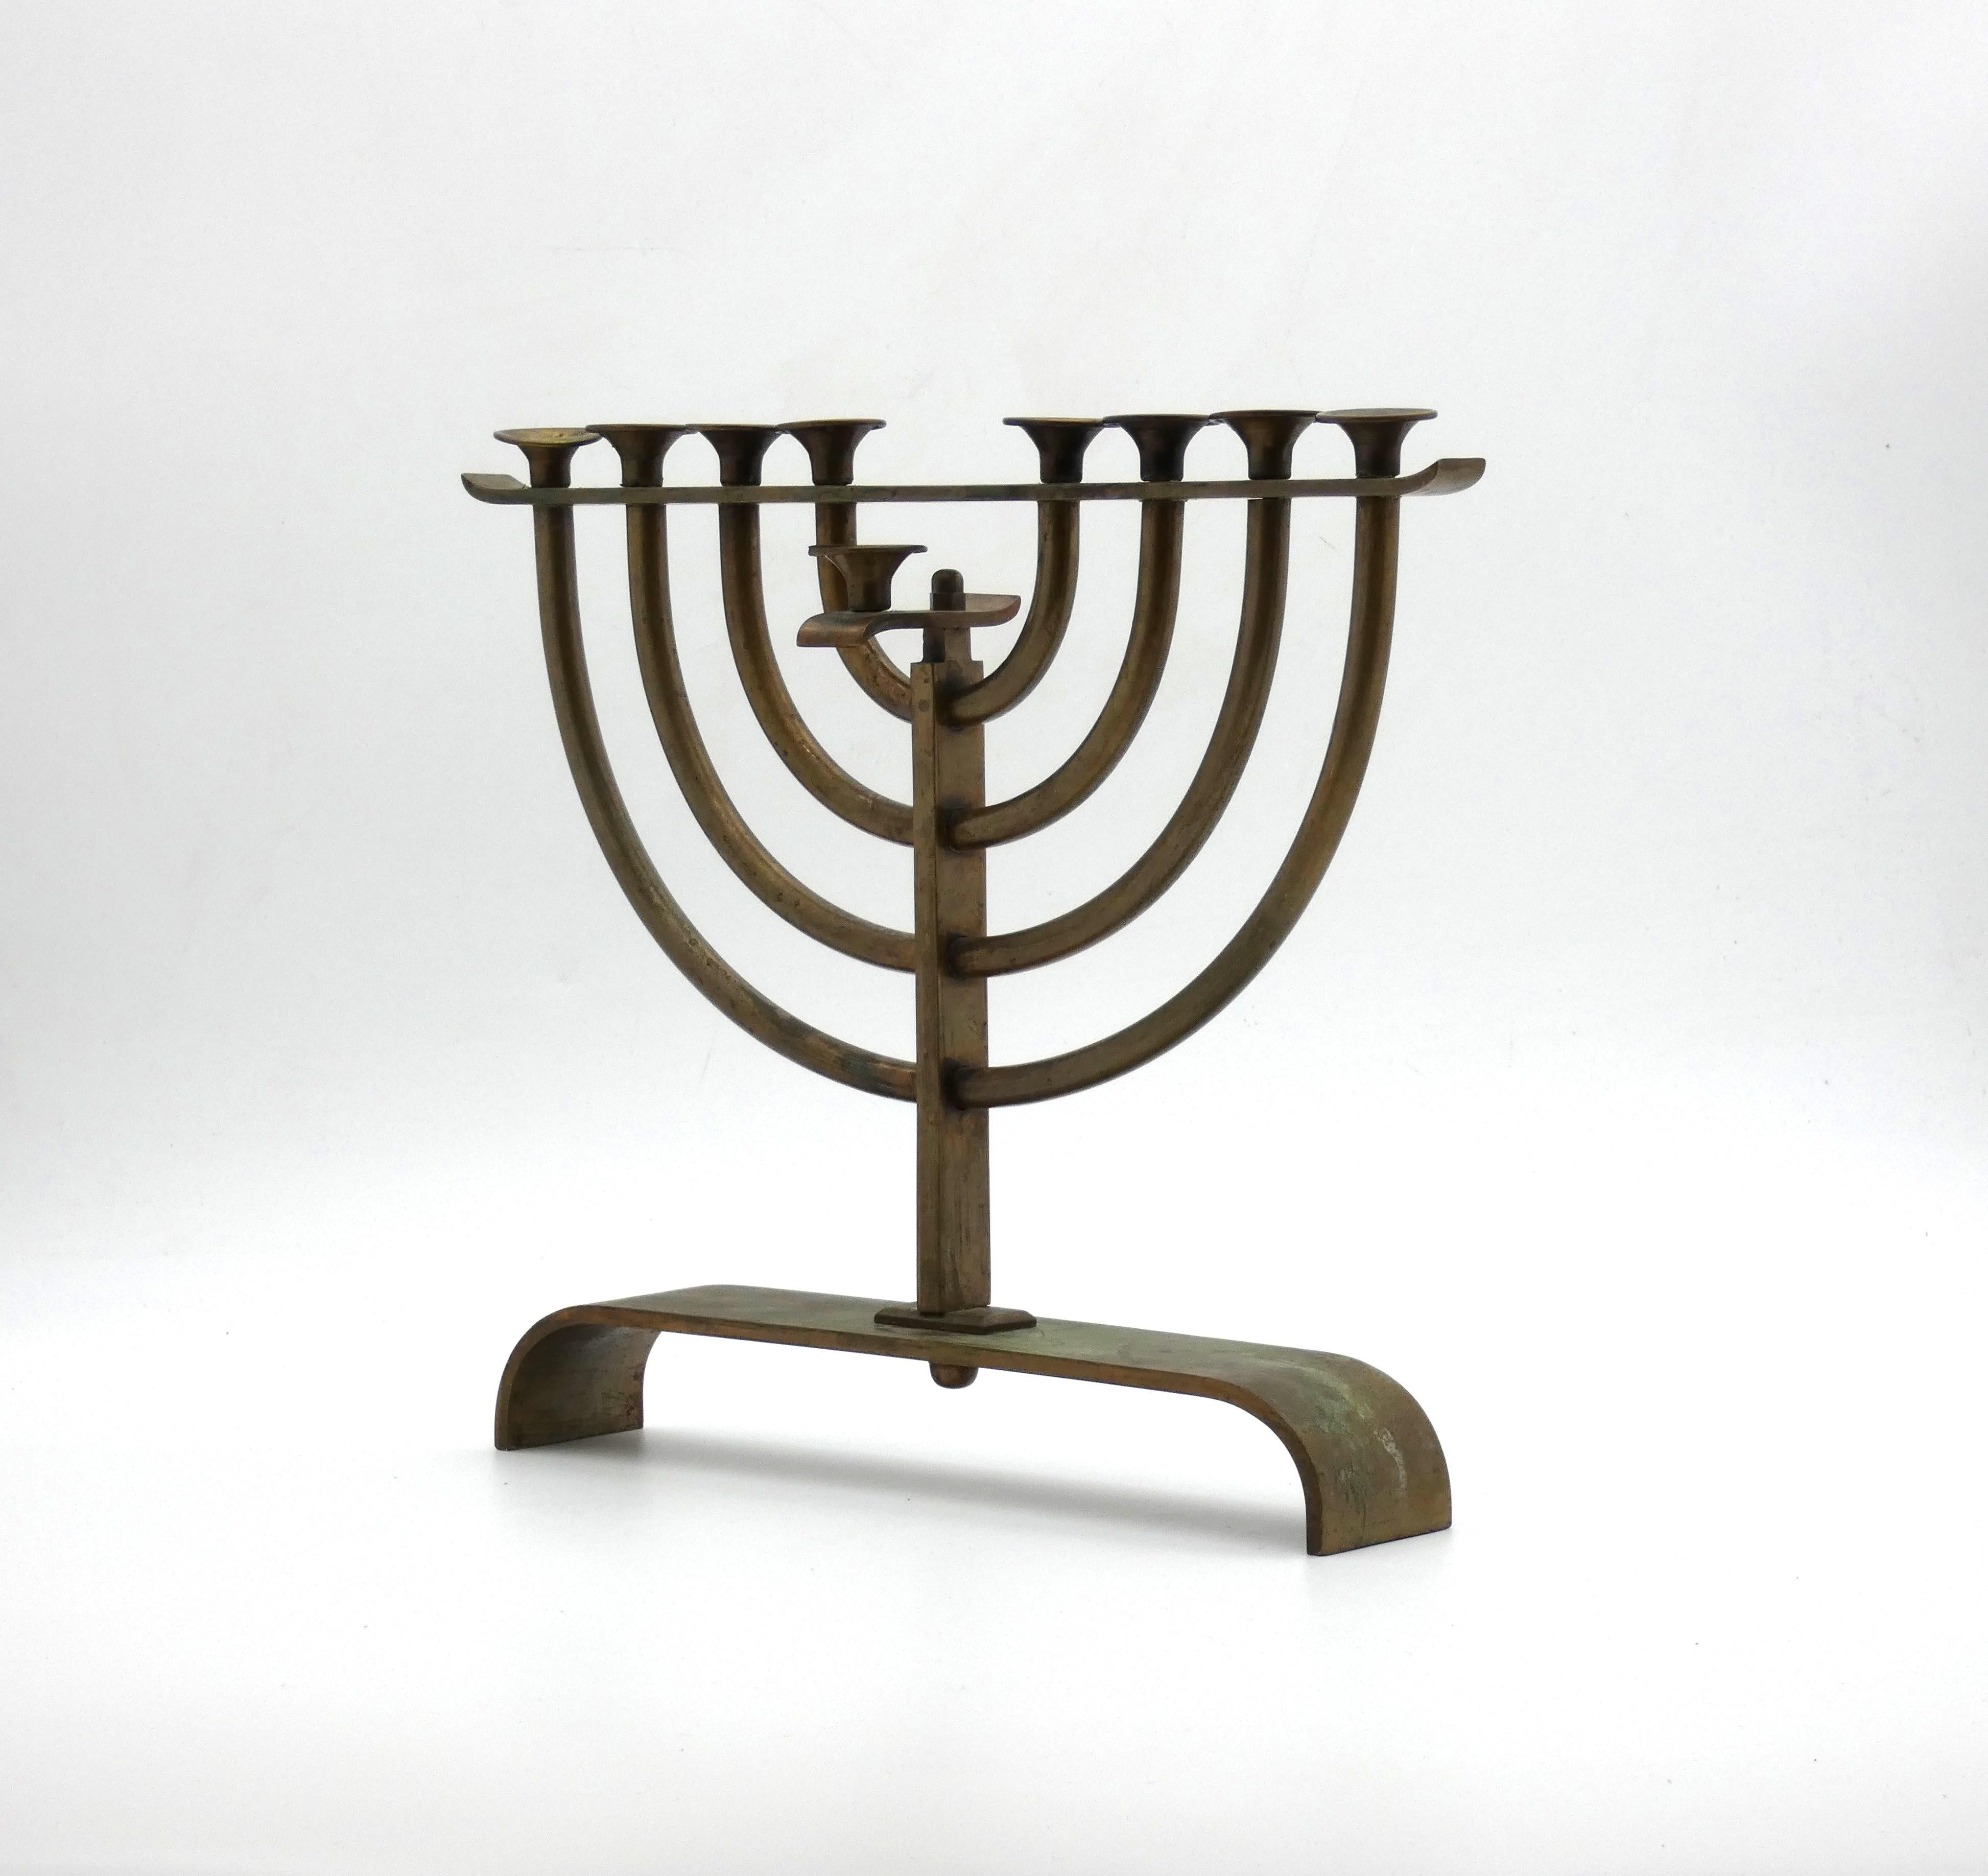 This modern designed menorah was made at the start of the modern era in Israel in the 1930's

Menorah rests on a curved C-shaped base and has eight connecting pipe-shaped stems branching out and connected to the center stem. 

Center stem is